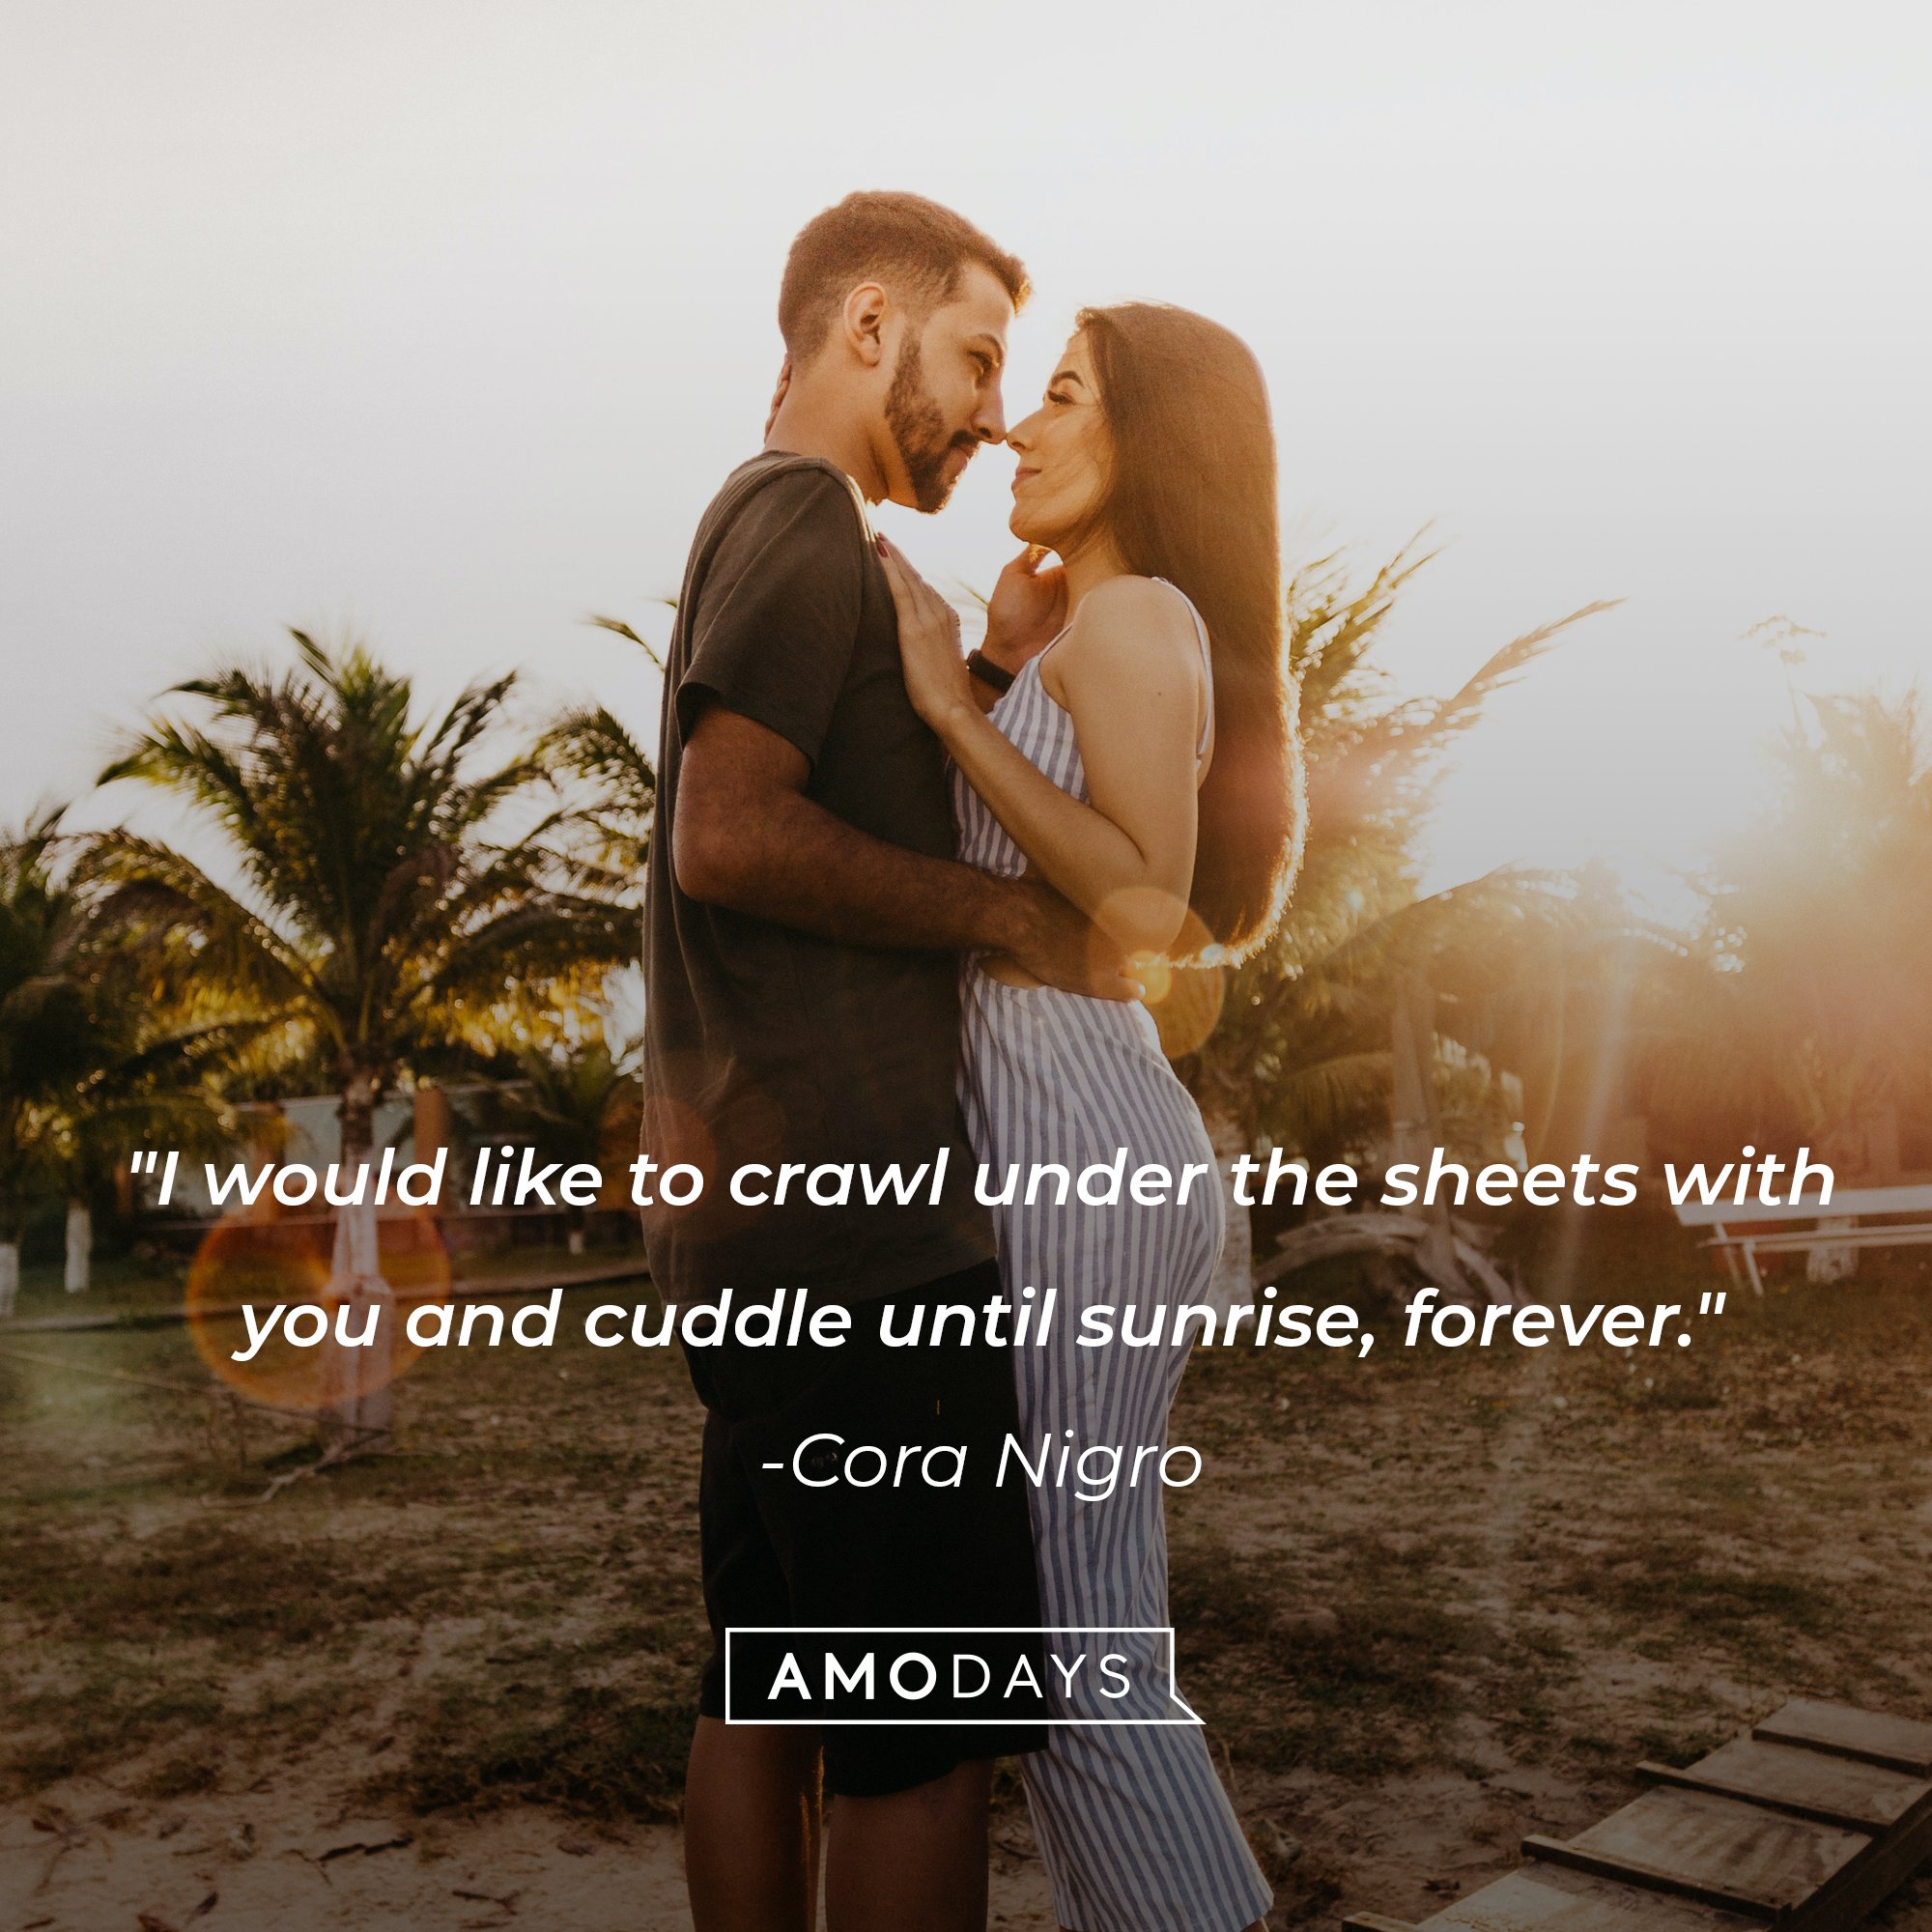 Cora Nigro's quote: "I would like to crawl under the sheets with you and cuddle until sunrise, forever." | Image: AmoDays